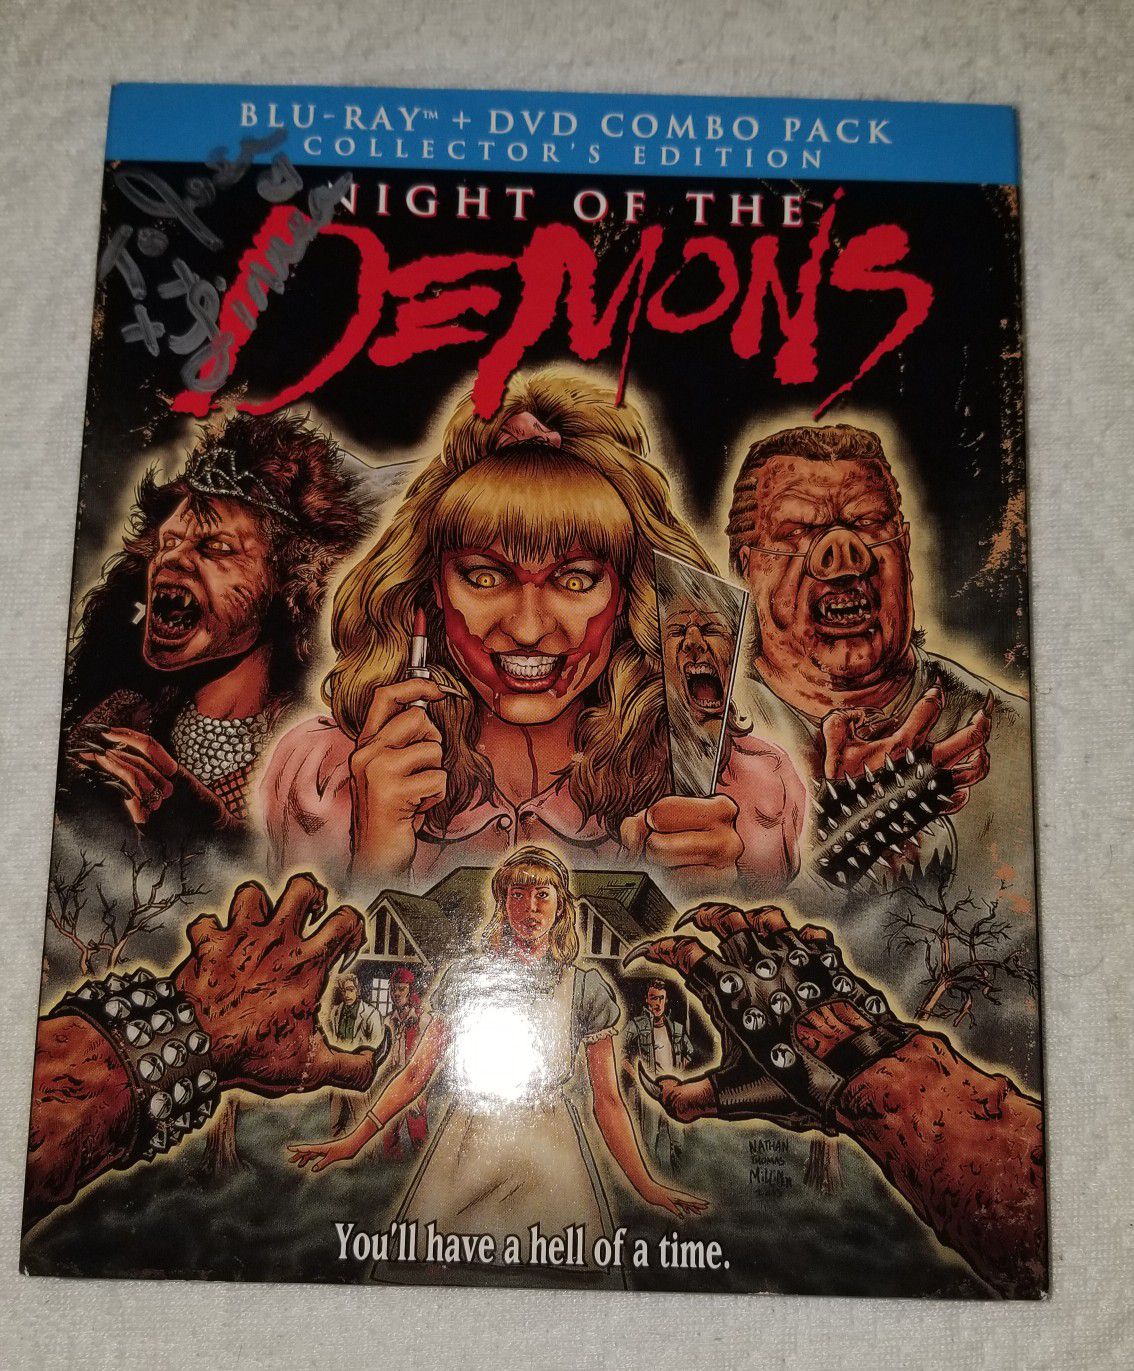 NIGHT OF THE DEMONS Bluray signed by star Linnea Quigley